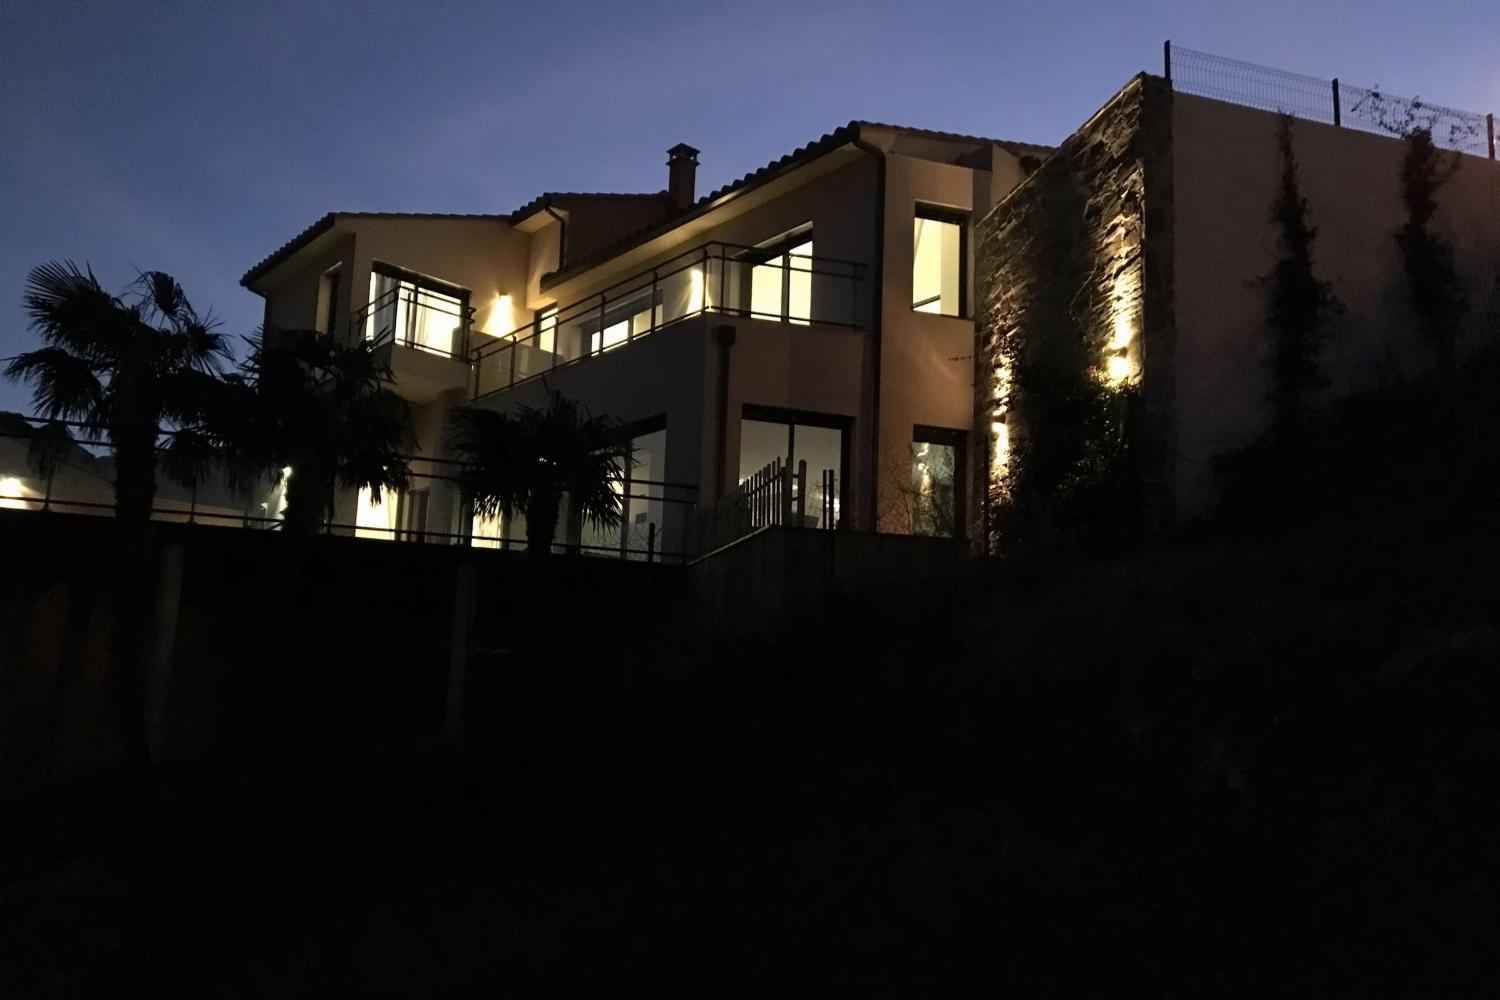 Holiday villa in Collioure at night